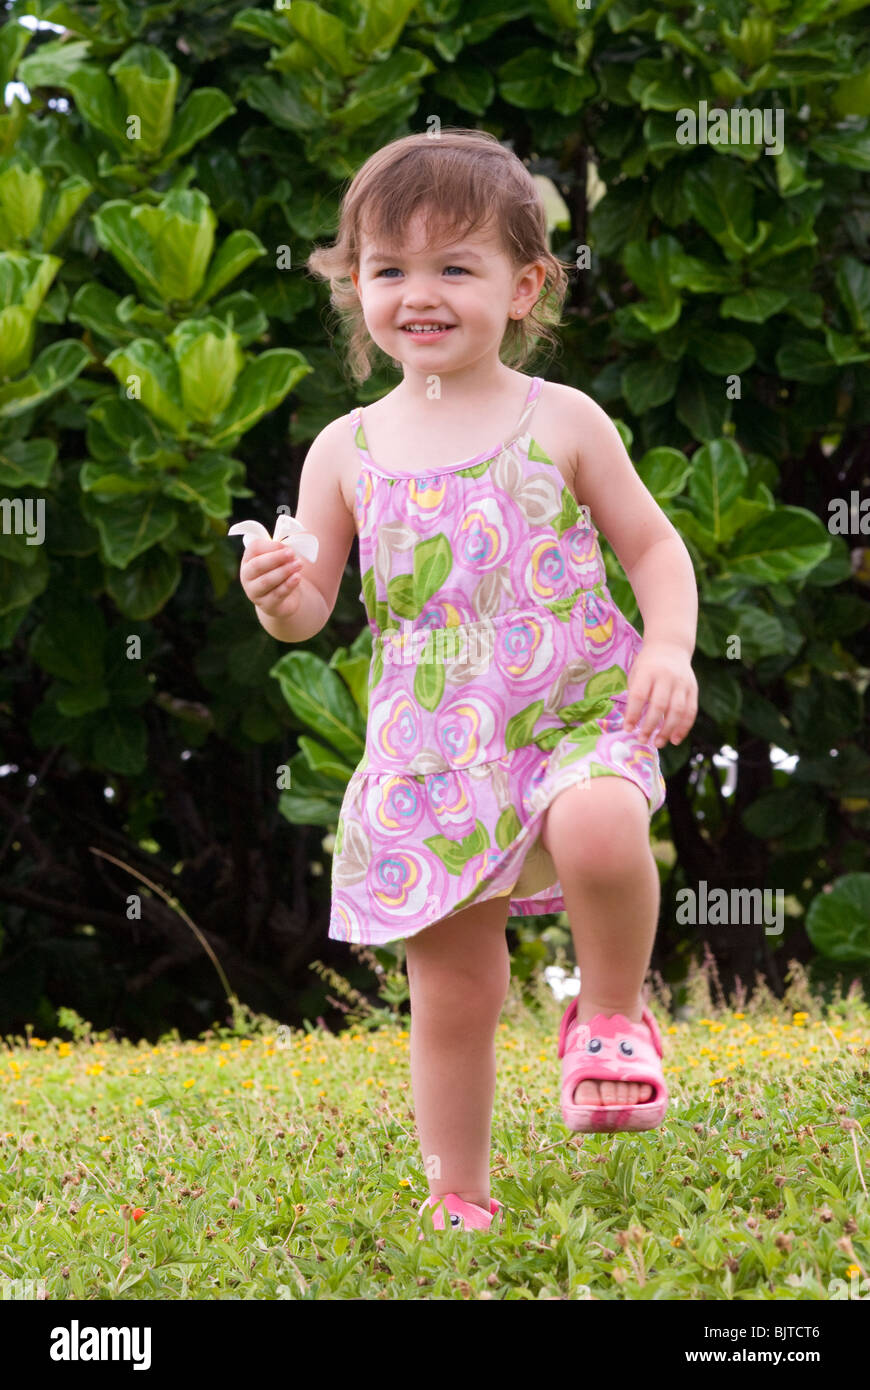 Two year old playful young girl having fun outdoors Stock Photo